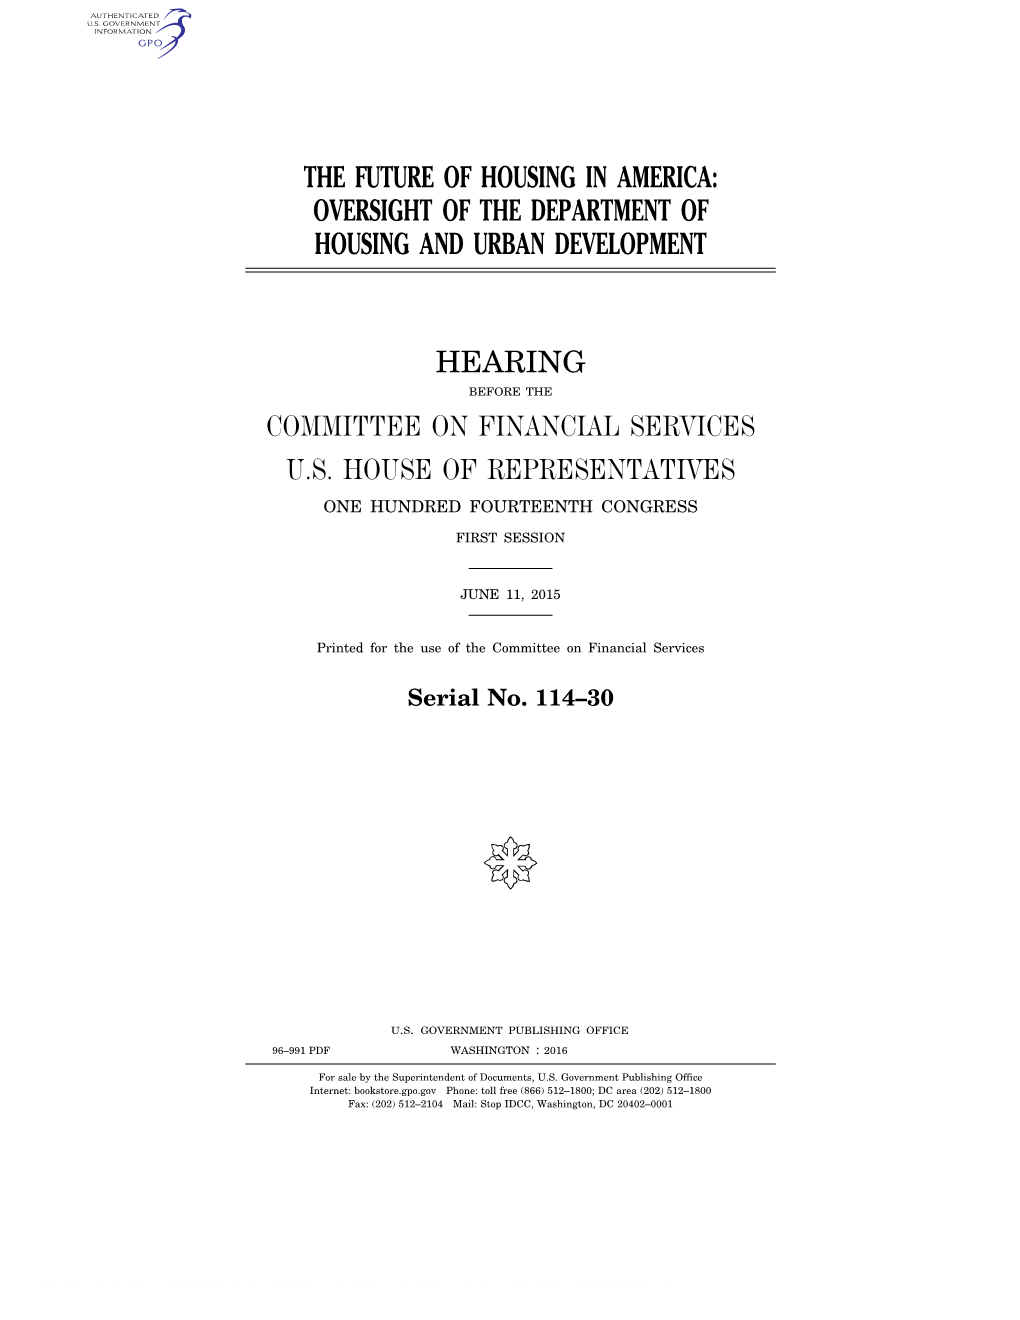 The Future of Housing in America: Oversight of the Department of Housing and Urban Development